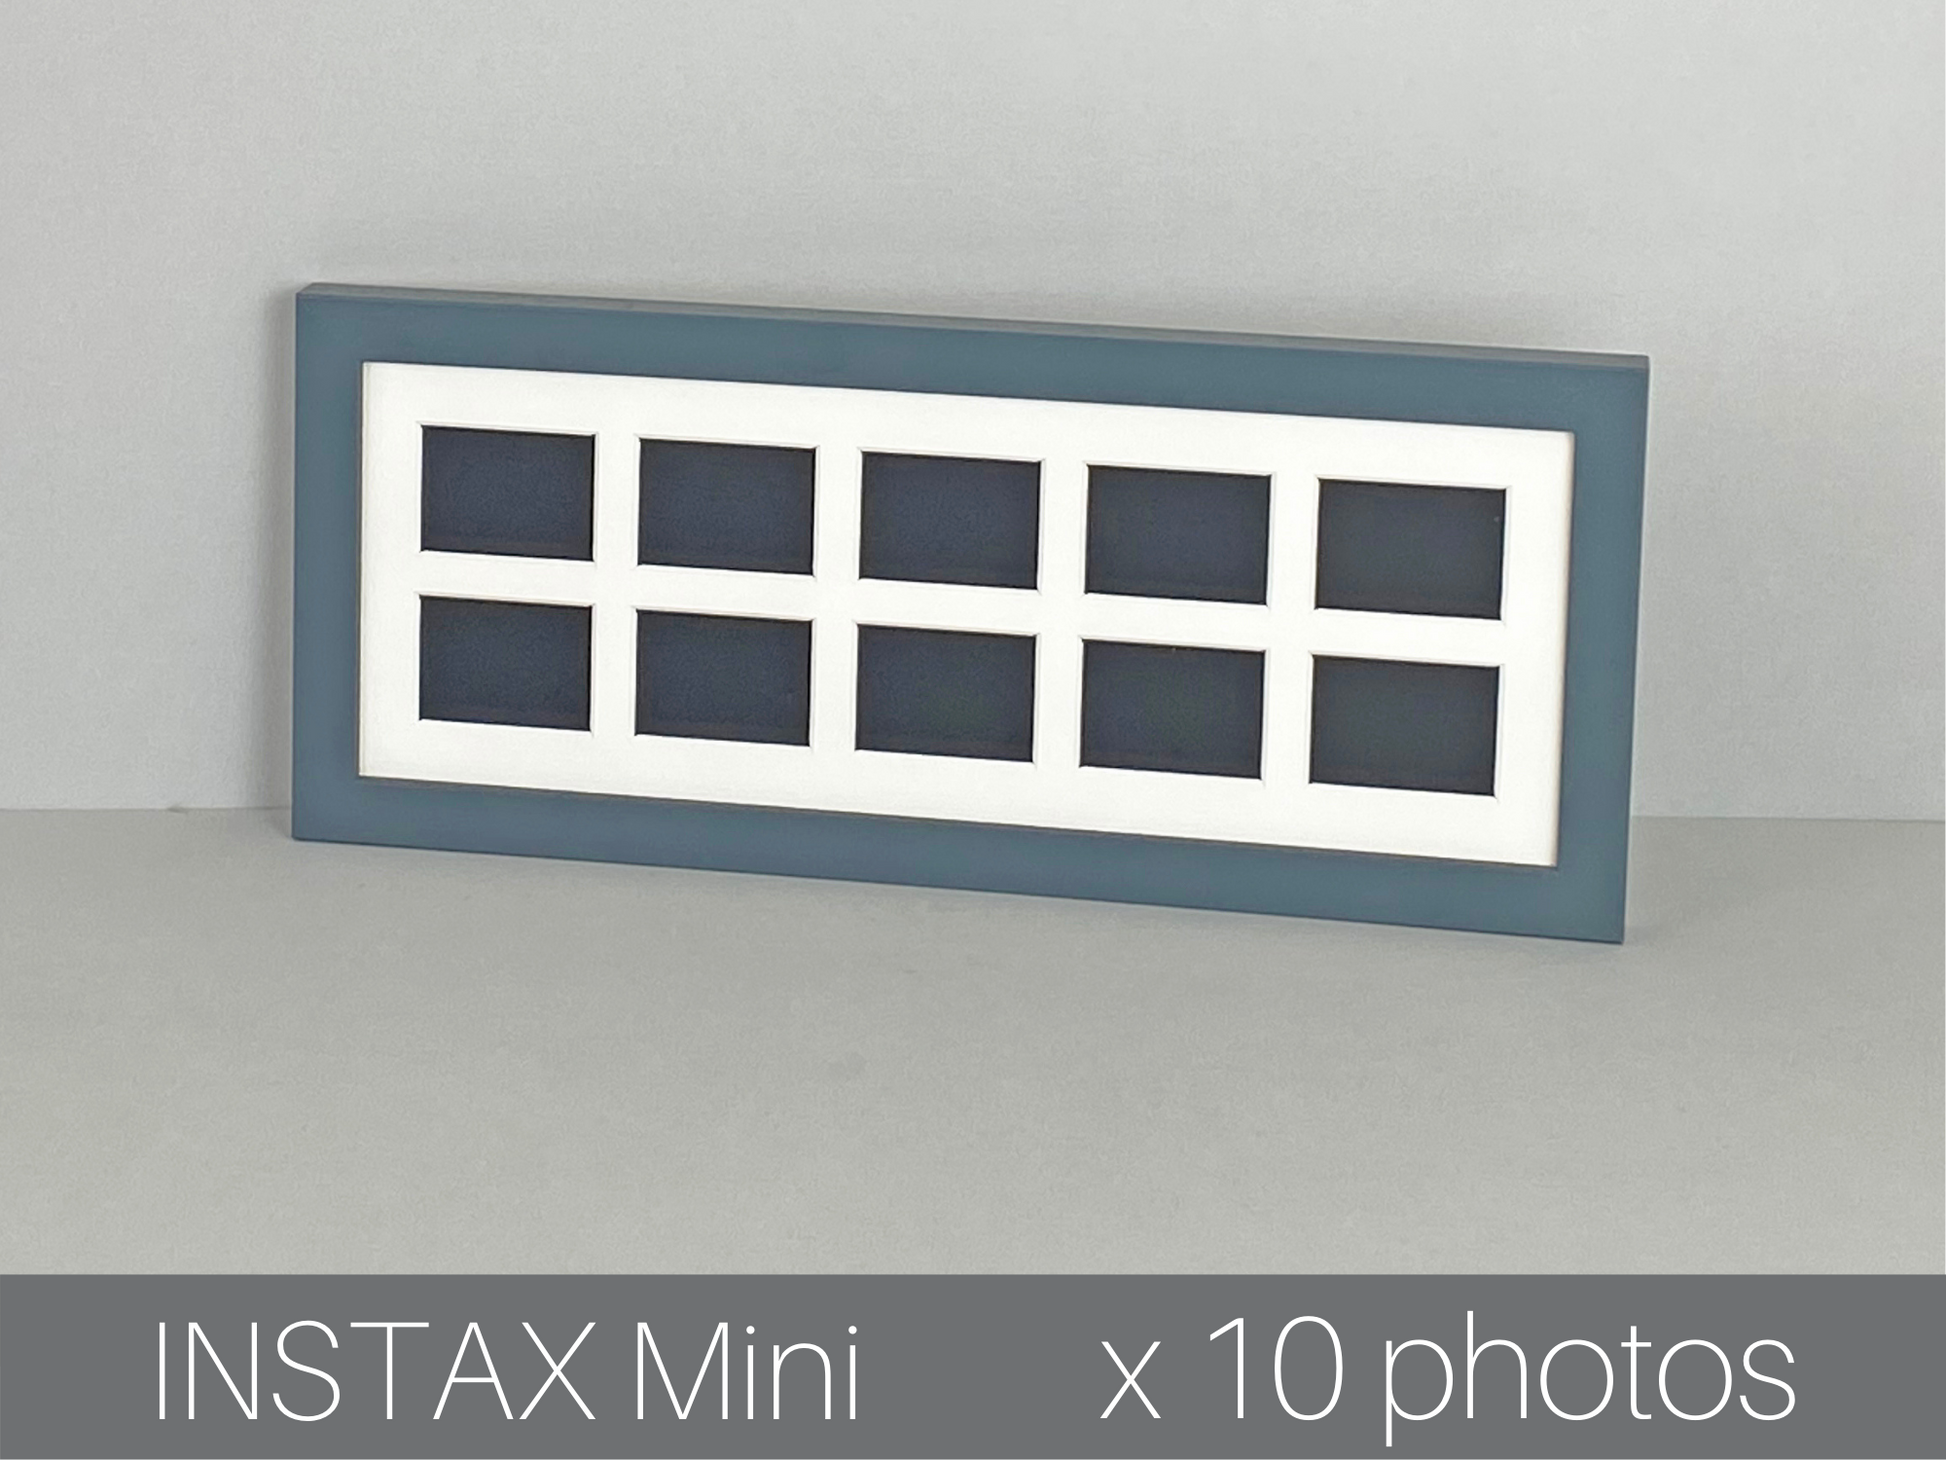 Instax Mini. Holds Ten instax sized Photos. Multi Aperture Wooden Photo Frame. 15x40cm. - PhotoFramesandMore - Wooden Picture Frames